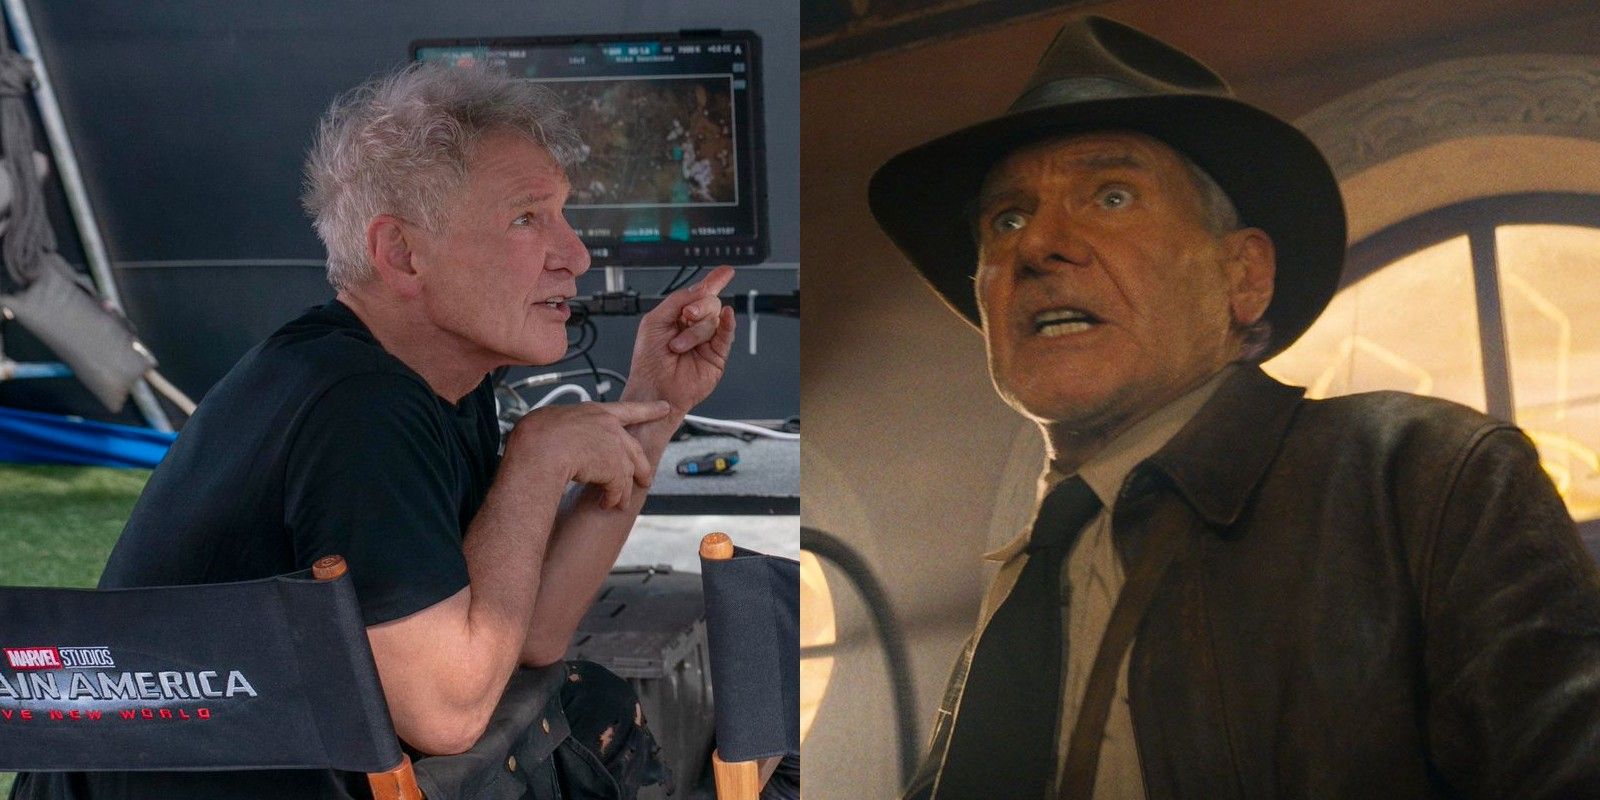 Harrison Ford as Thunderbolt Ross on the set of Captain America: Brave New World and Indiana Jones in Indiana Jones and the Dial of Destiny